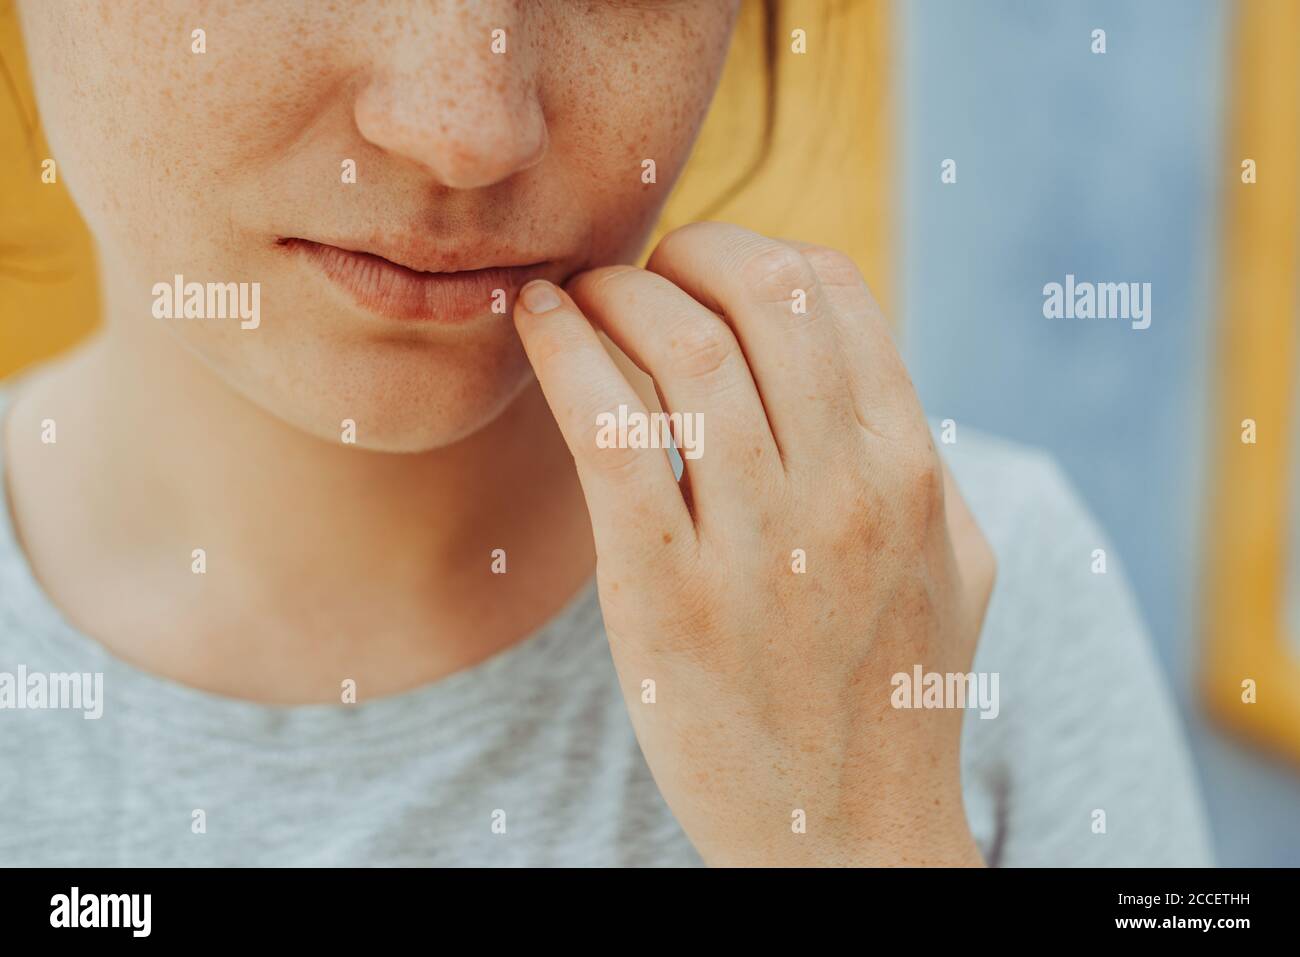 Close up portrait of young woman with freckles holding hand at lips Stock Photo